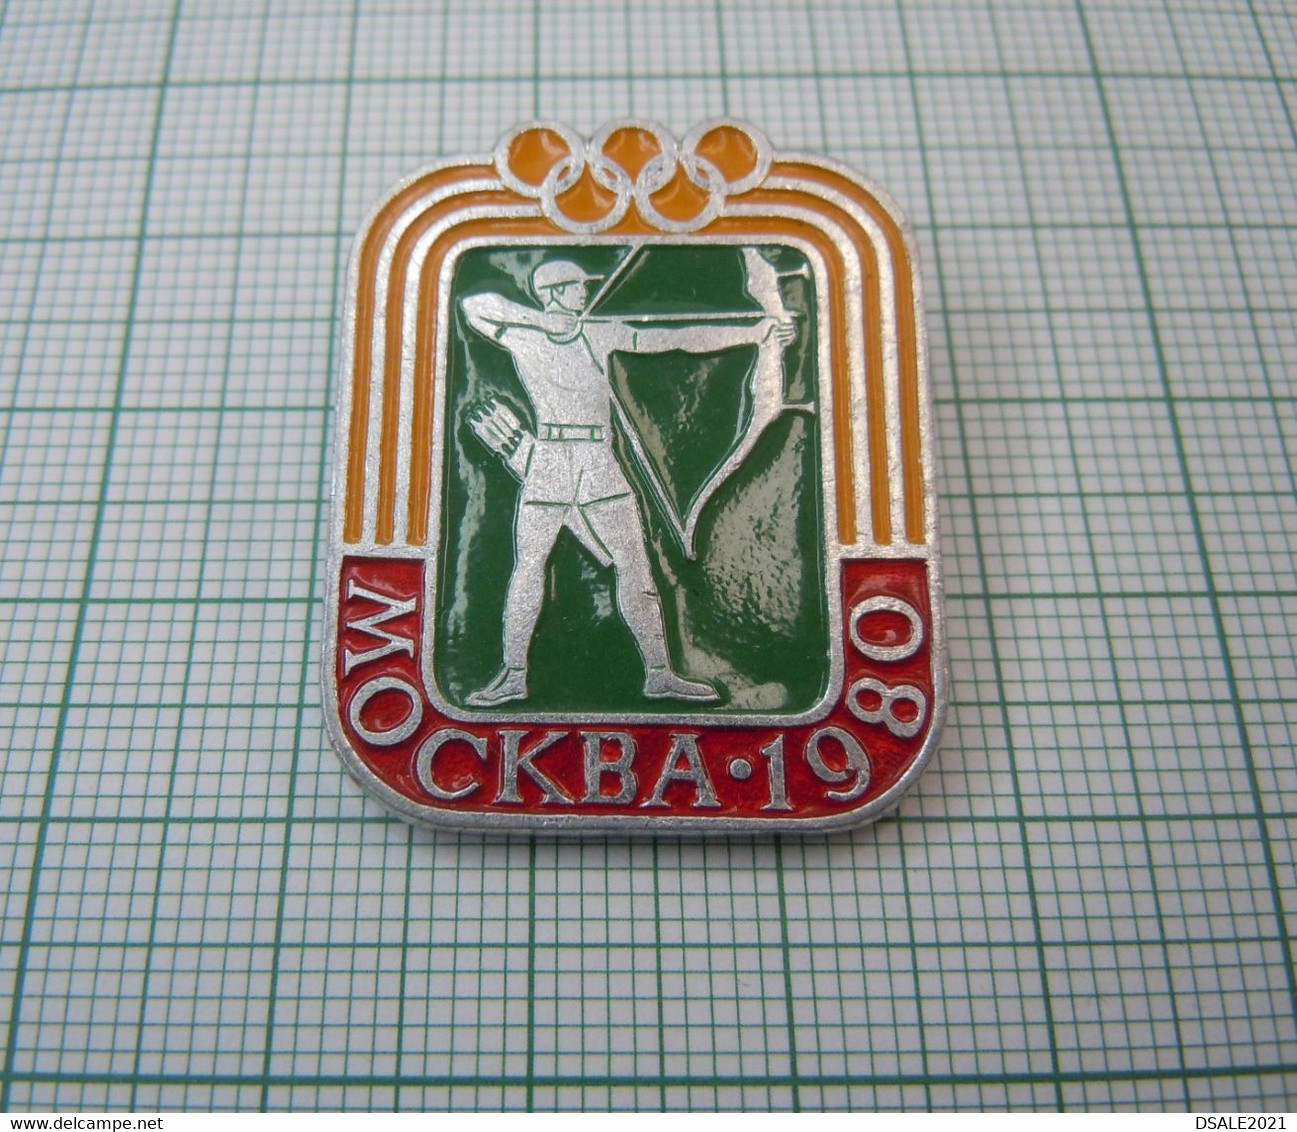 Russia USSR Russland Sowjetunion Moscow 1980 Summer Olympic Archery Sport Mascot Vintage Pin Badge (m985) - Archery